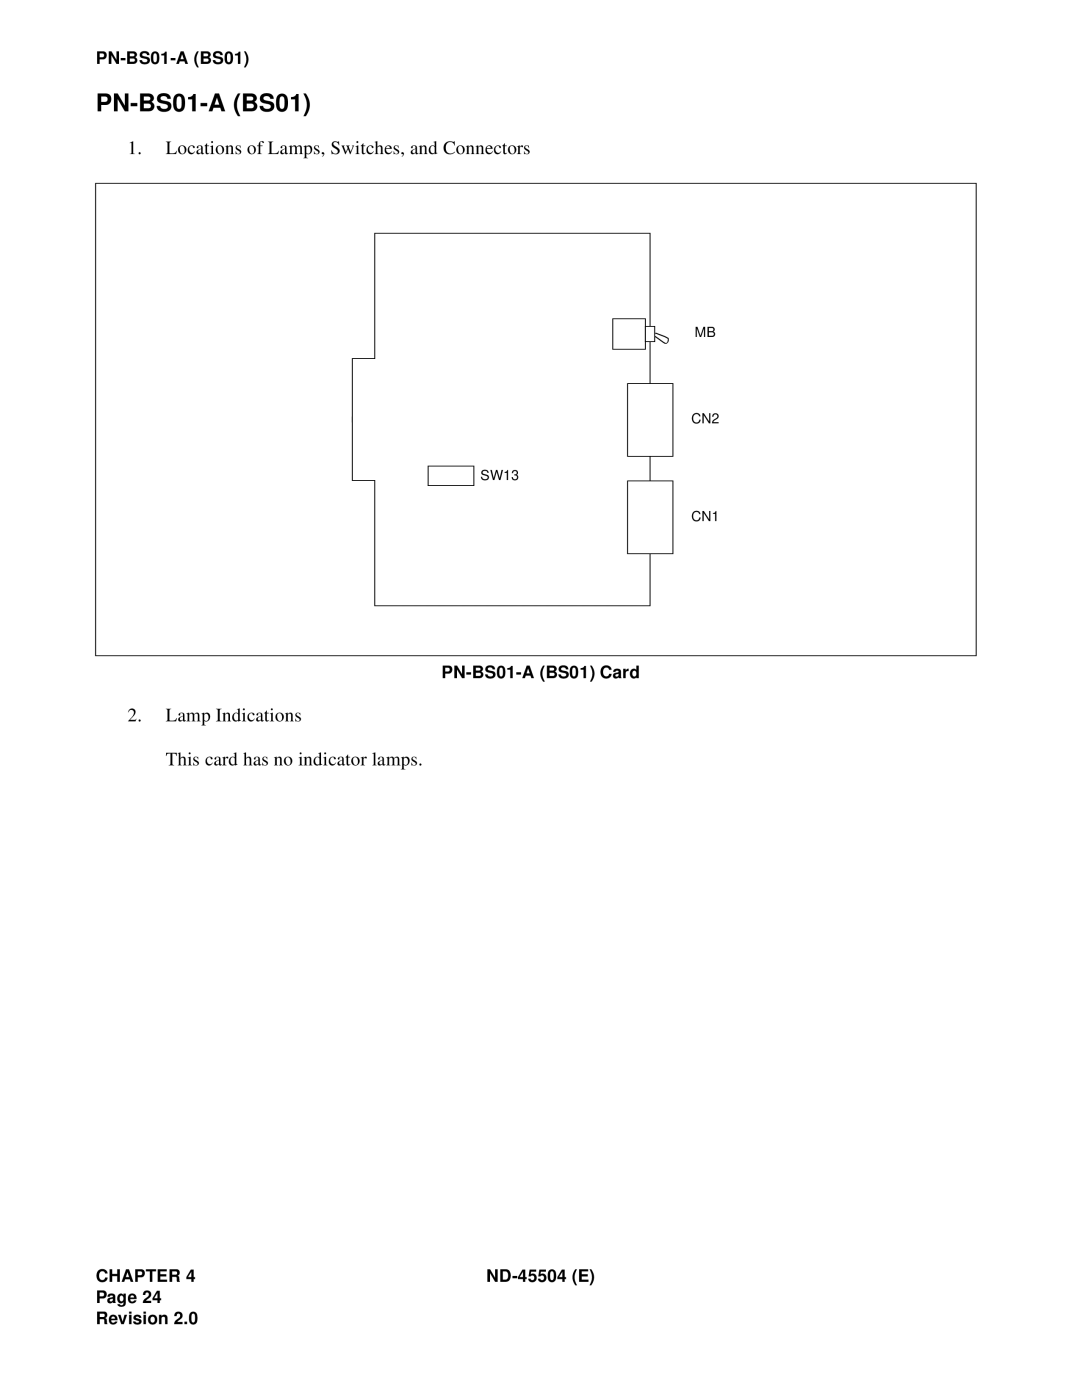 NEC 2000 IVS Locations of Lamps, Switches, and Connectors, Lamp Indications, PN-BS01-ABS01 Card, Chapter, ND-45504E 